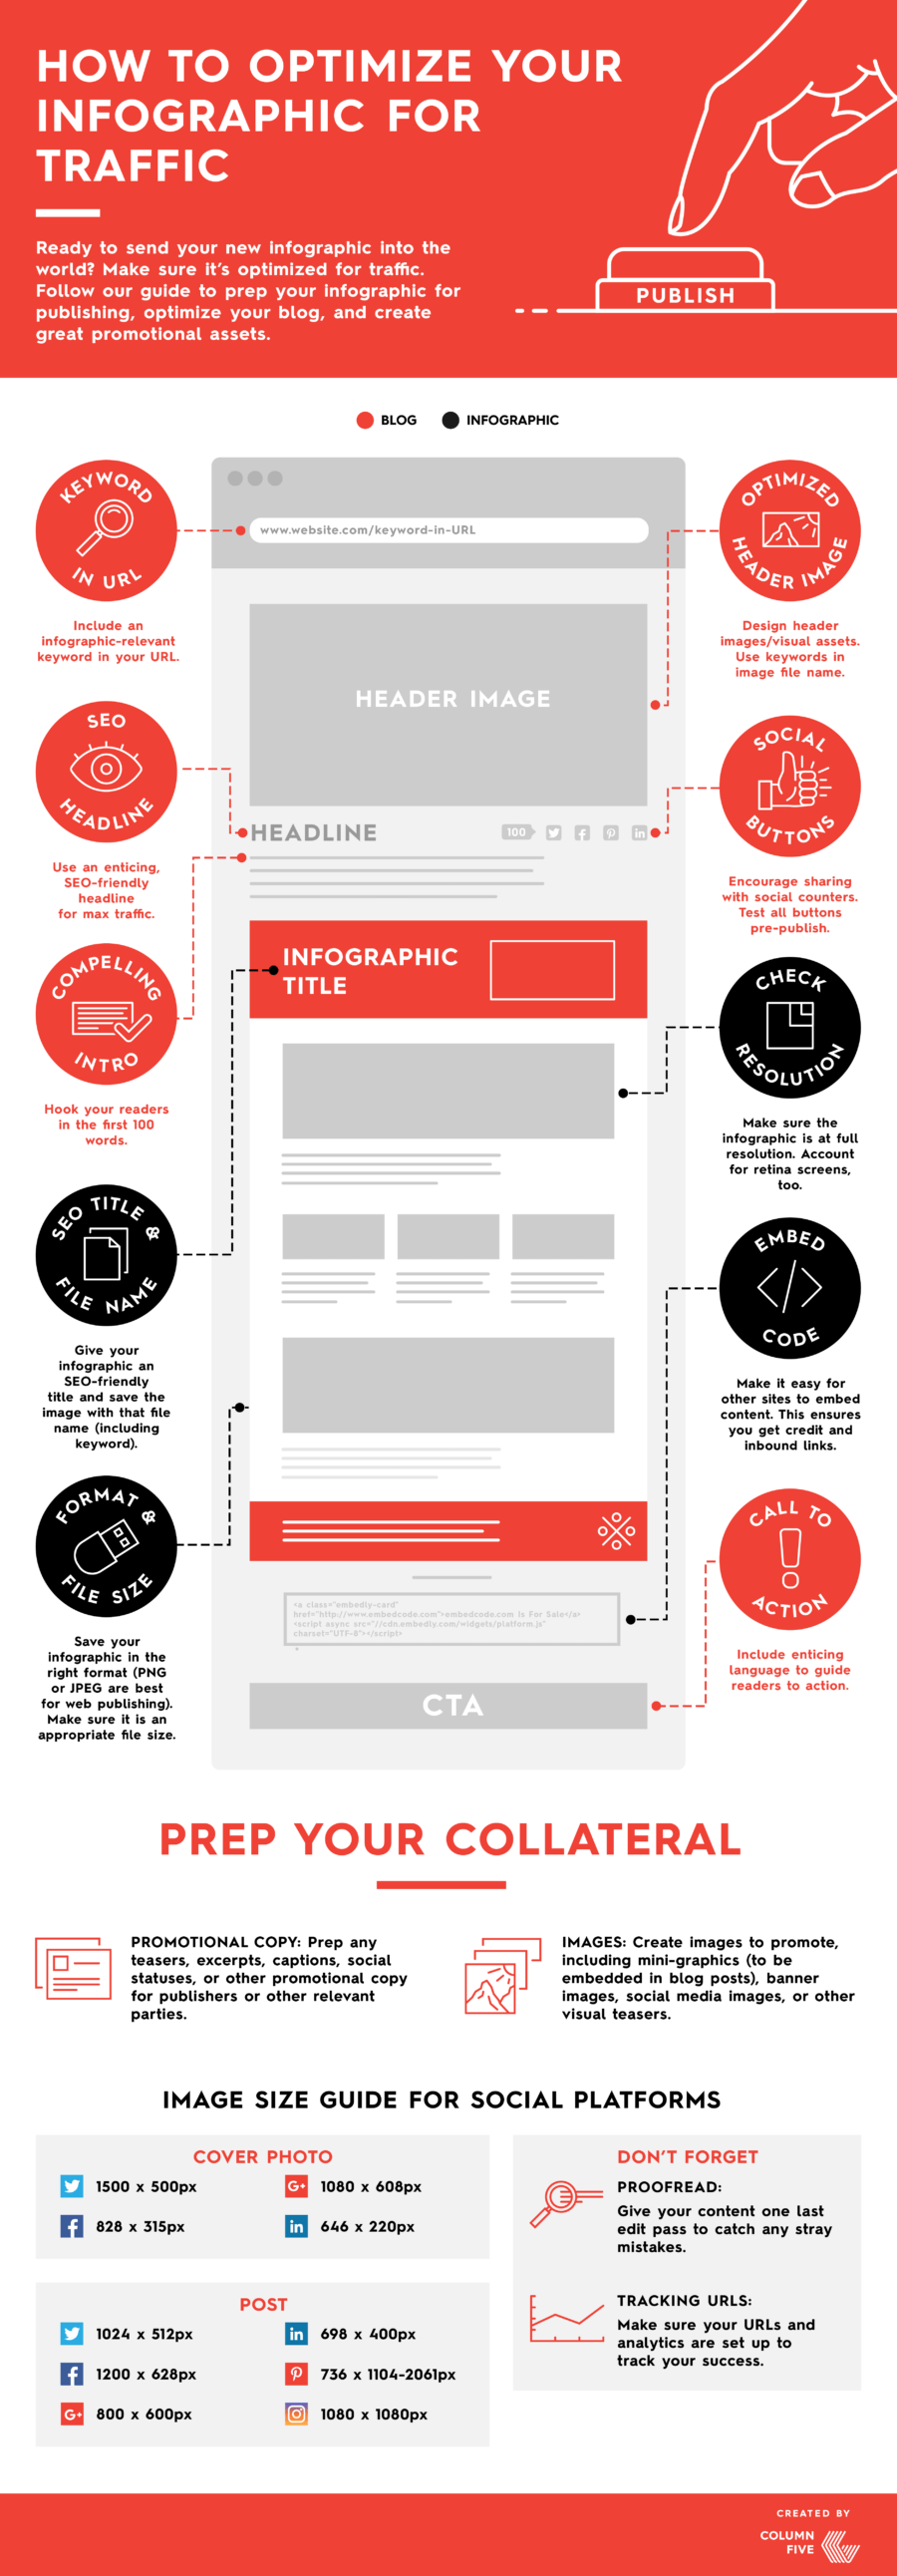 optimize-infographic-for-SEO